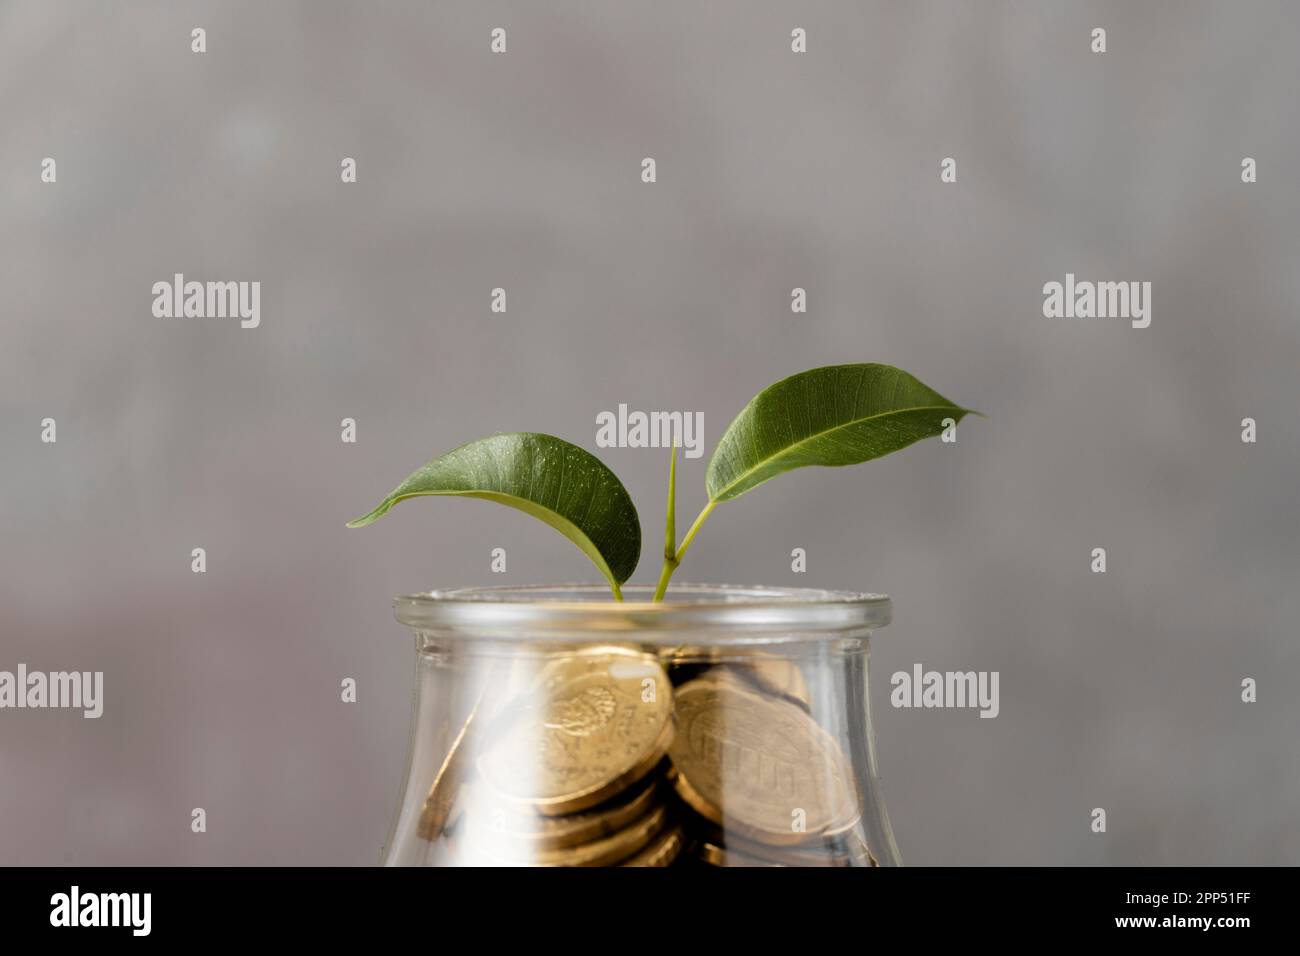 Front view plant growing from jar coins Stock Photo